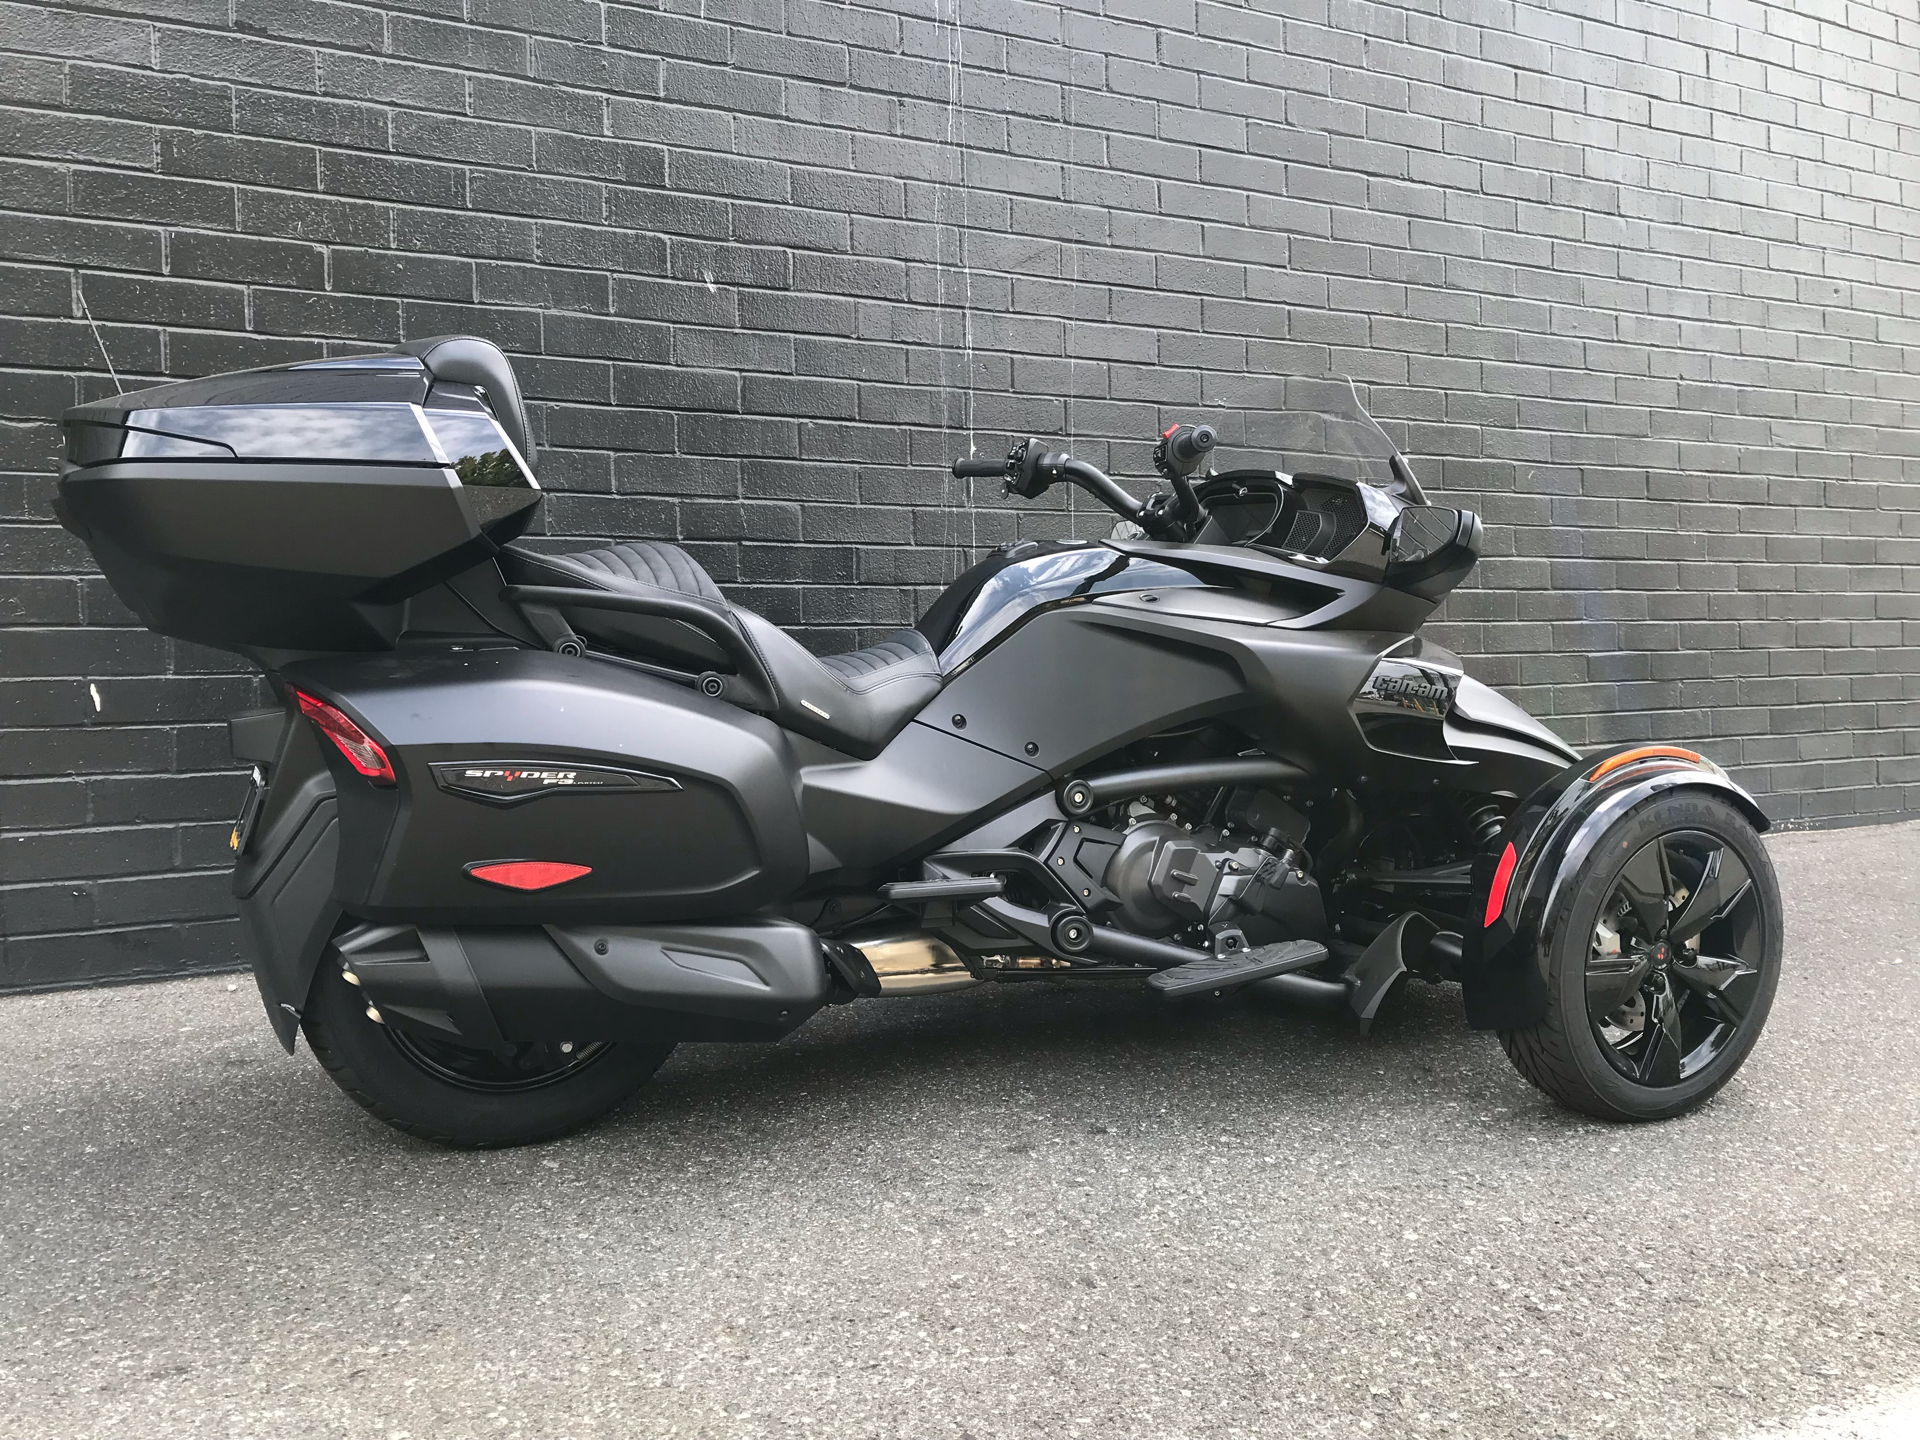 2022 Can-Am Spyder F3 Limited in San Jose, California - Photo 3